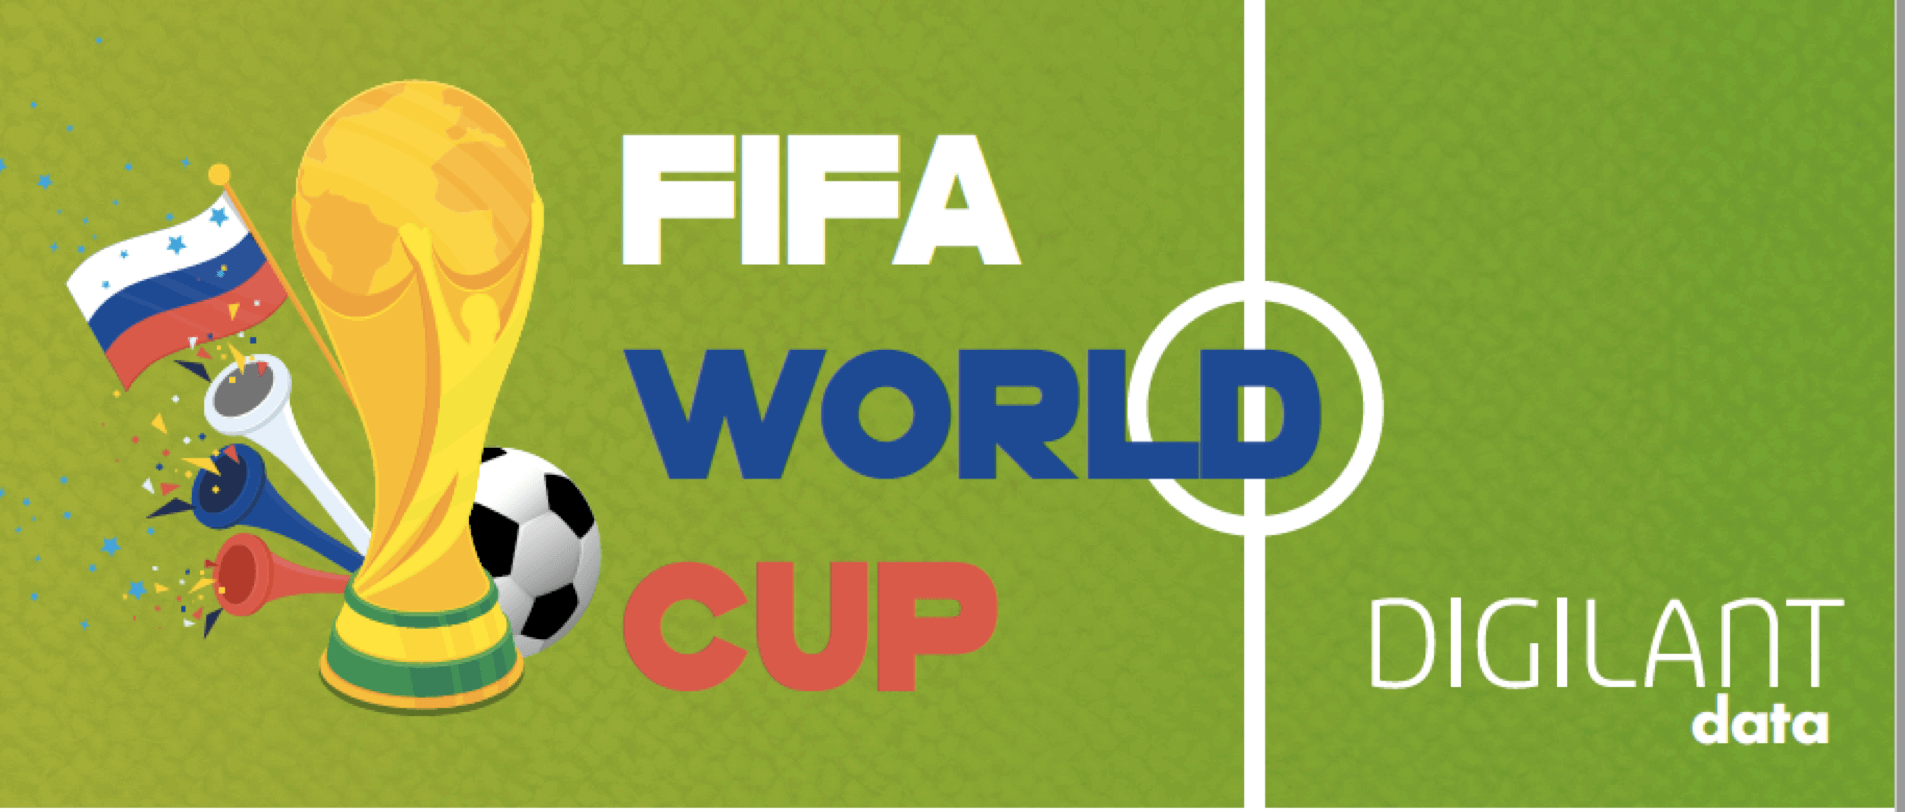 FIFA World Cup 2018 Infographic: Facts and Figures for Digital Media Buyers